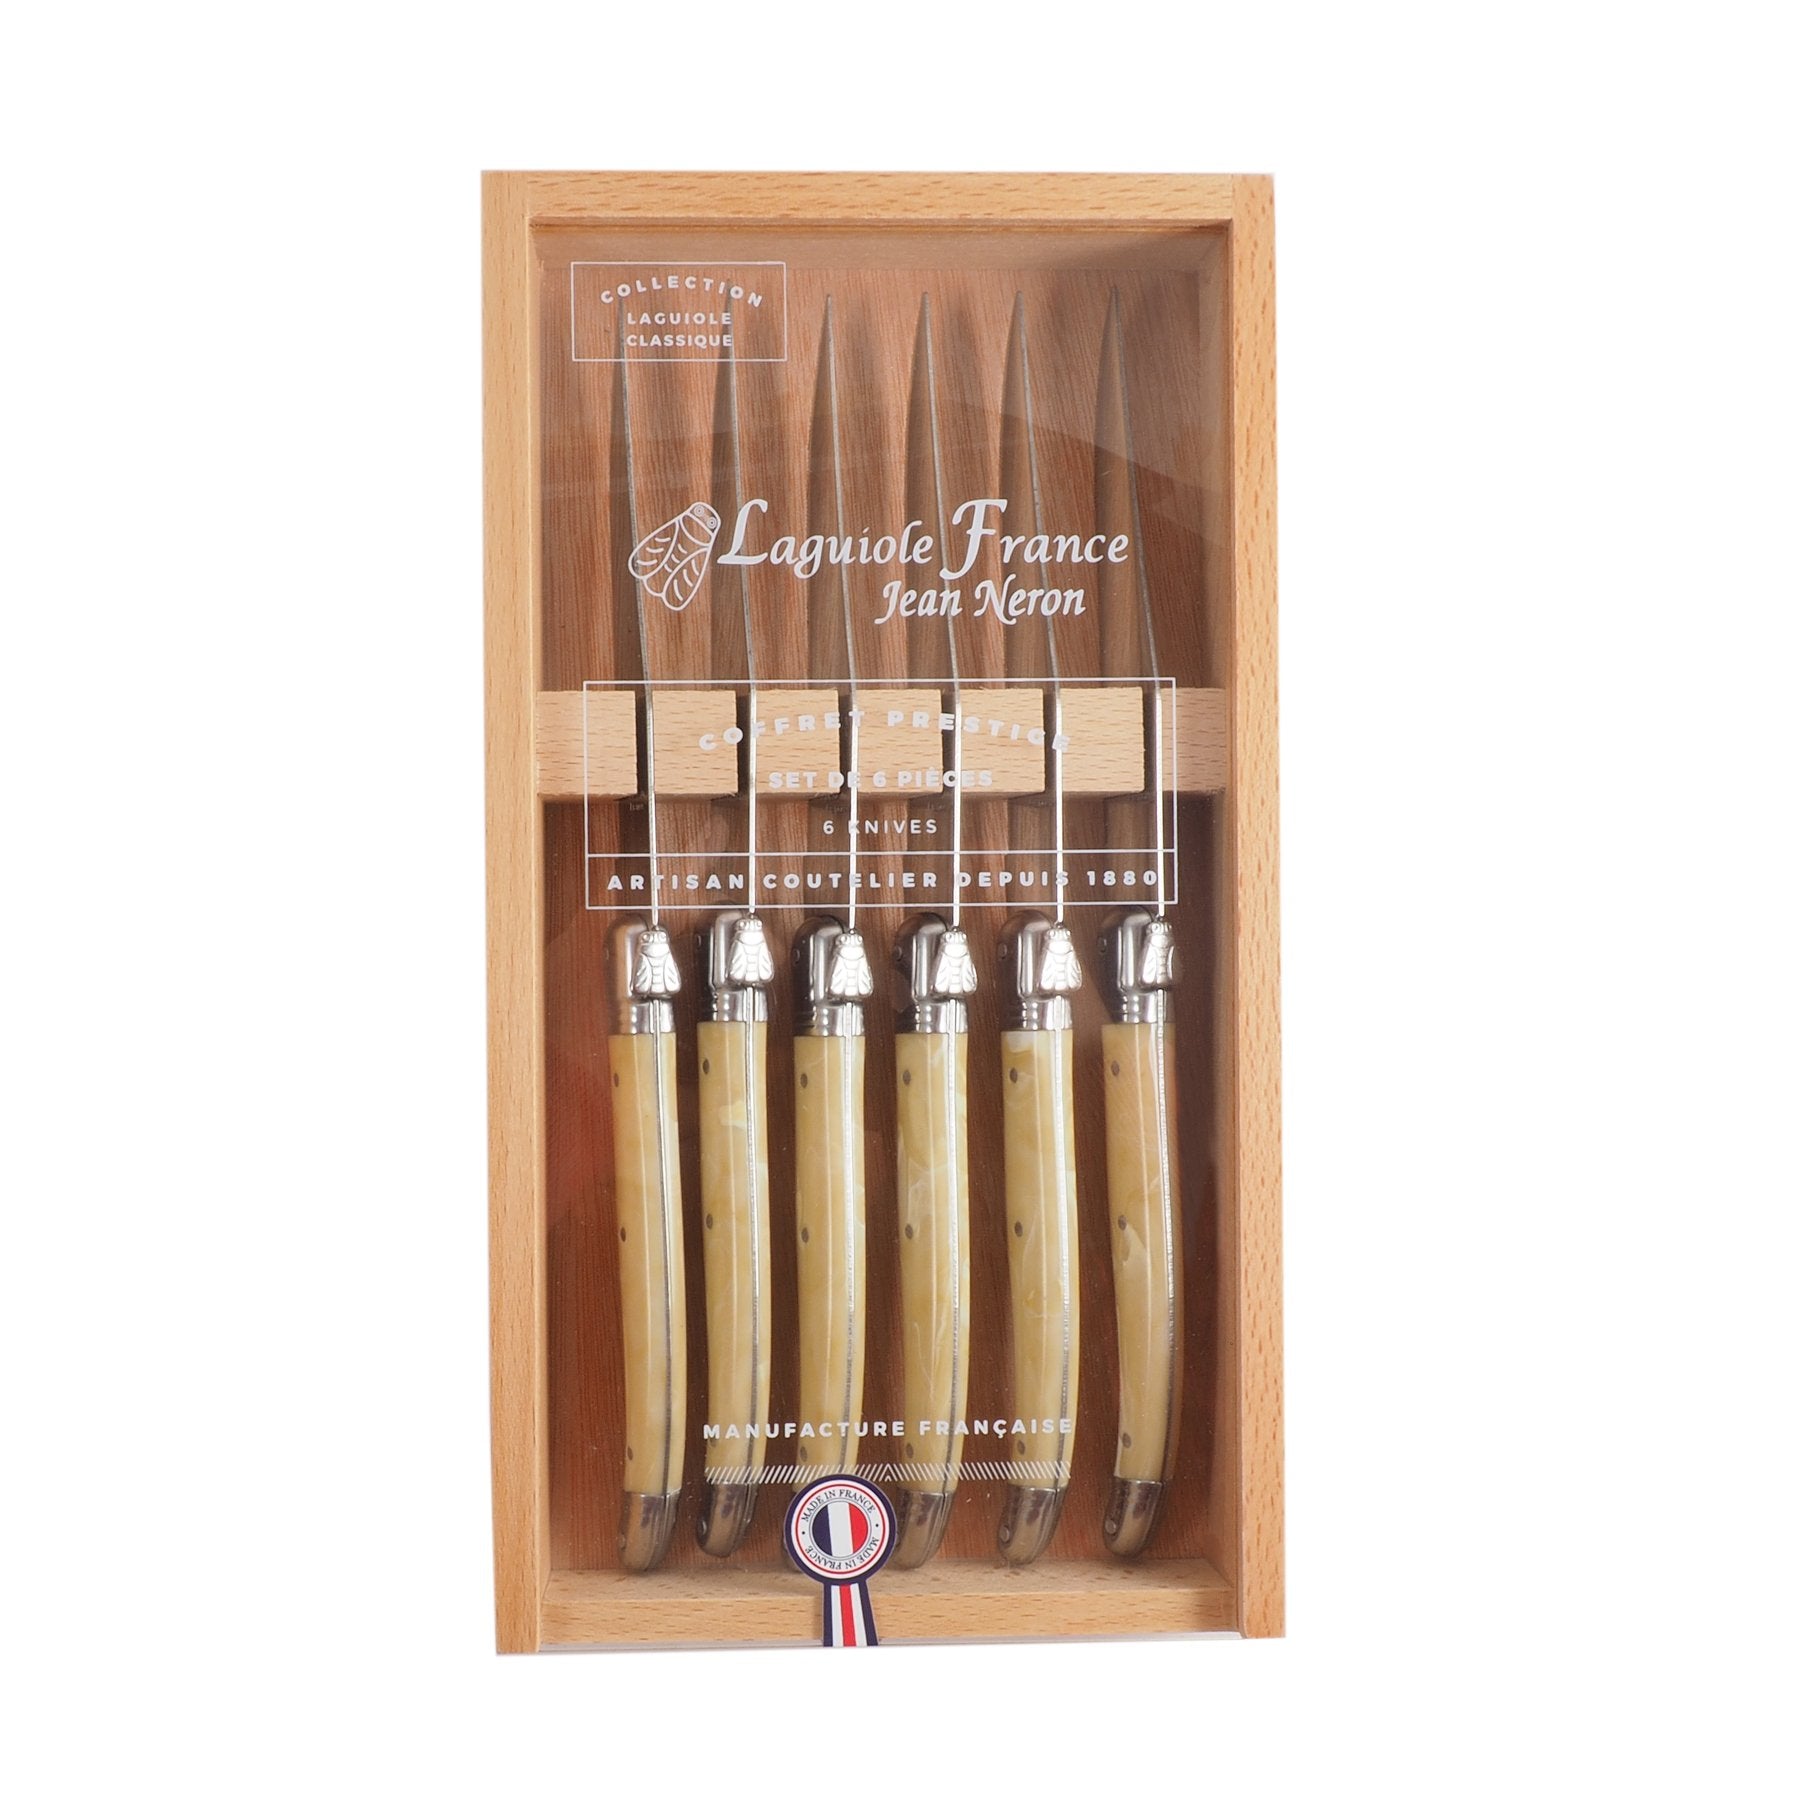 https://cdn.shopify.com/s/files/1/0288/5124/1065/products/7900-60540M_PH_AL-Laguiole-Pale-Horn-Knives-in-Wooden-Box-with-Acrylic-Lid-_Set-of-6_2048x2048.jpg?v=1627003988